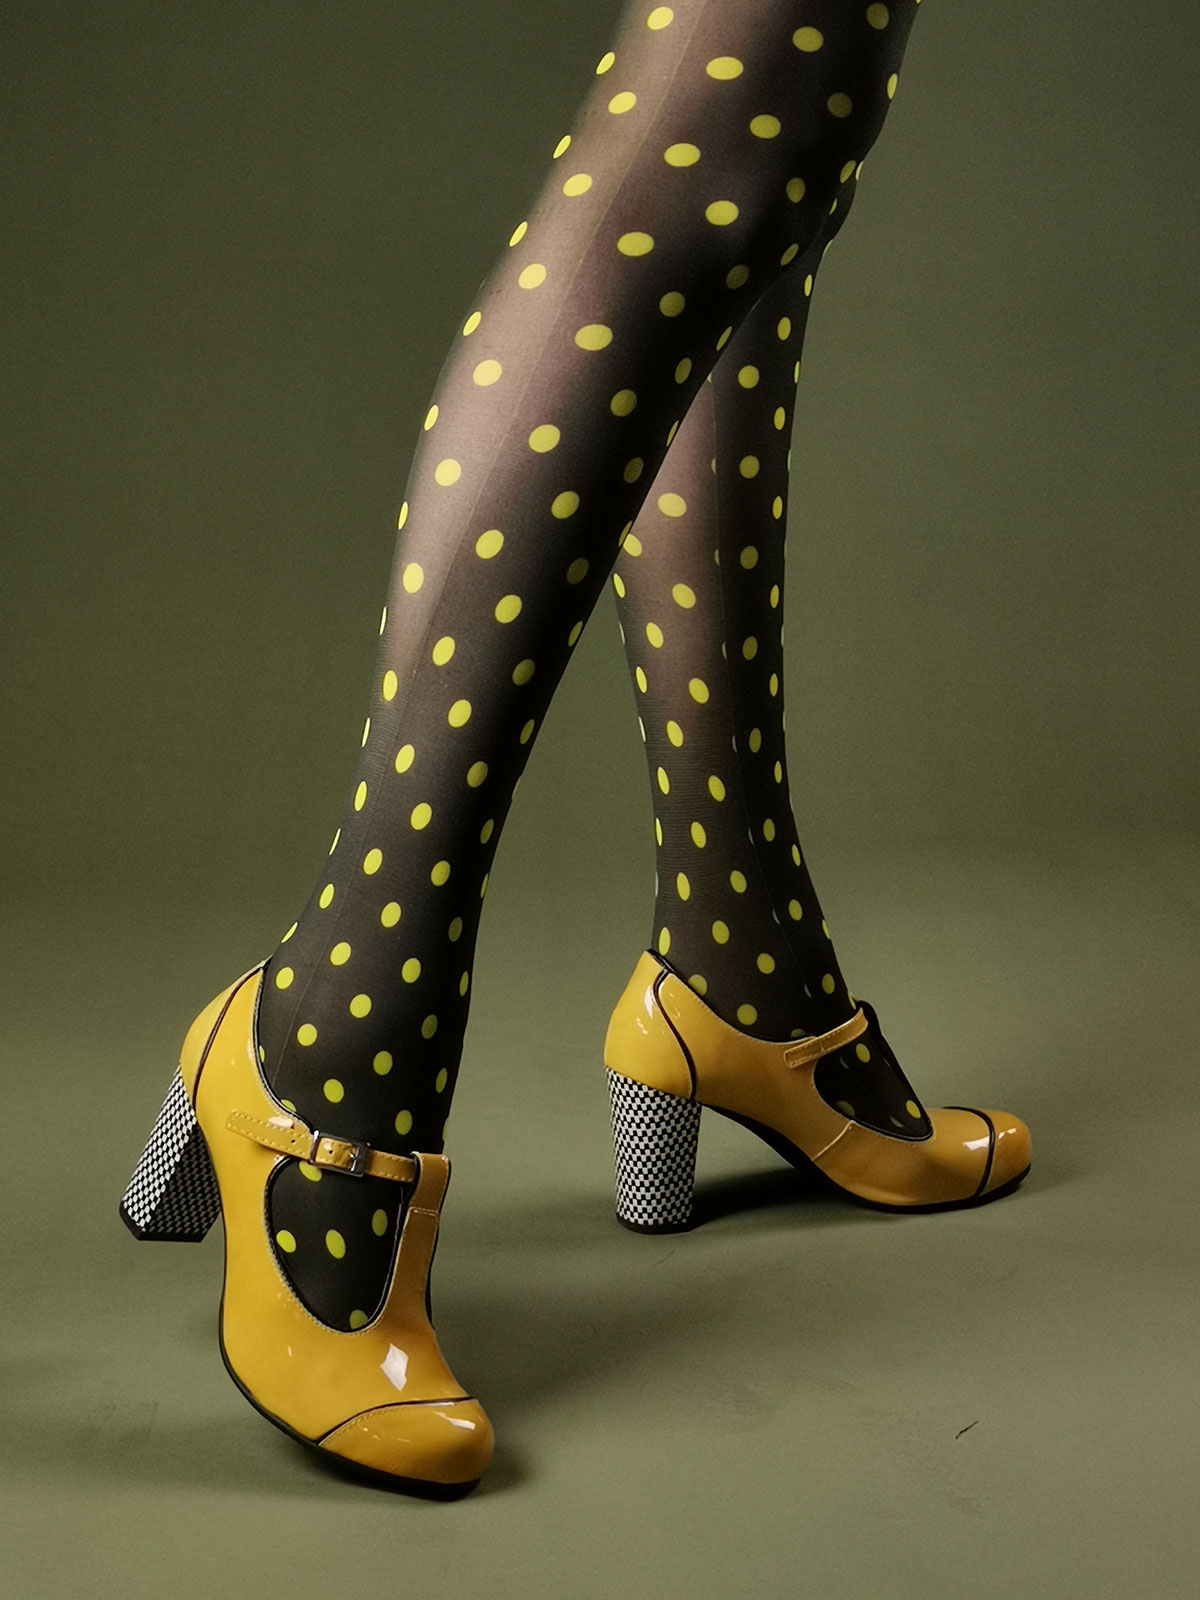 Black Polka Dot Tights with Shoes Hot Weather Outfits (5 ideas